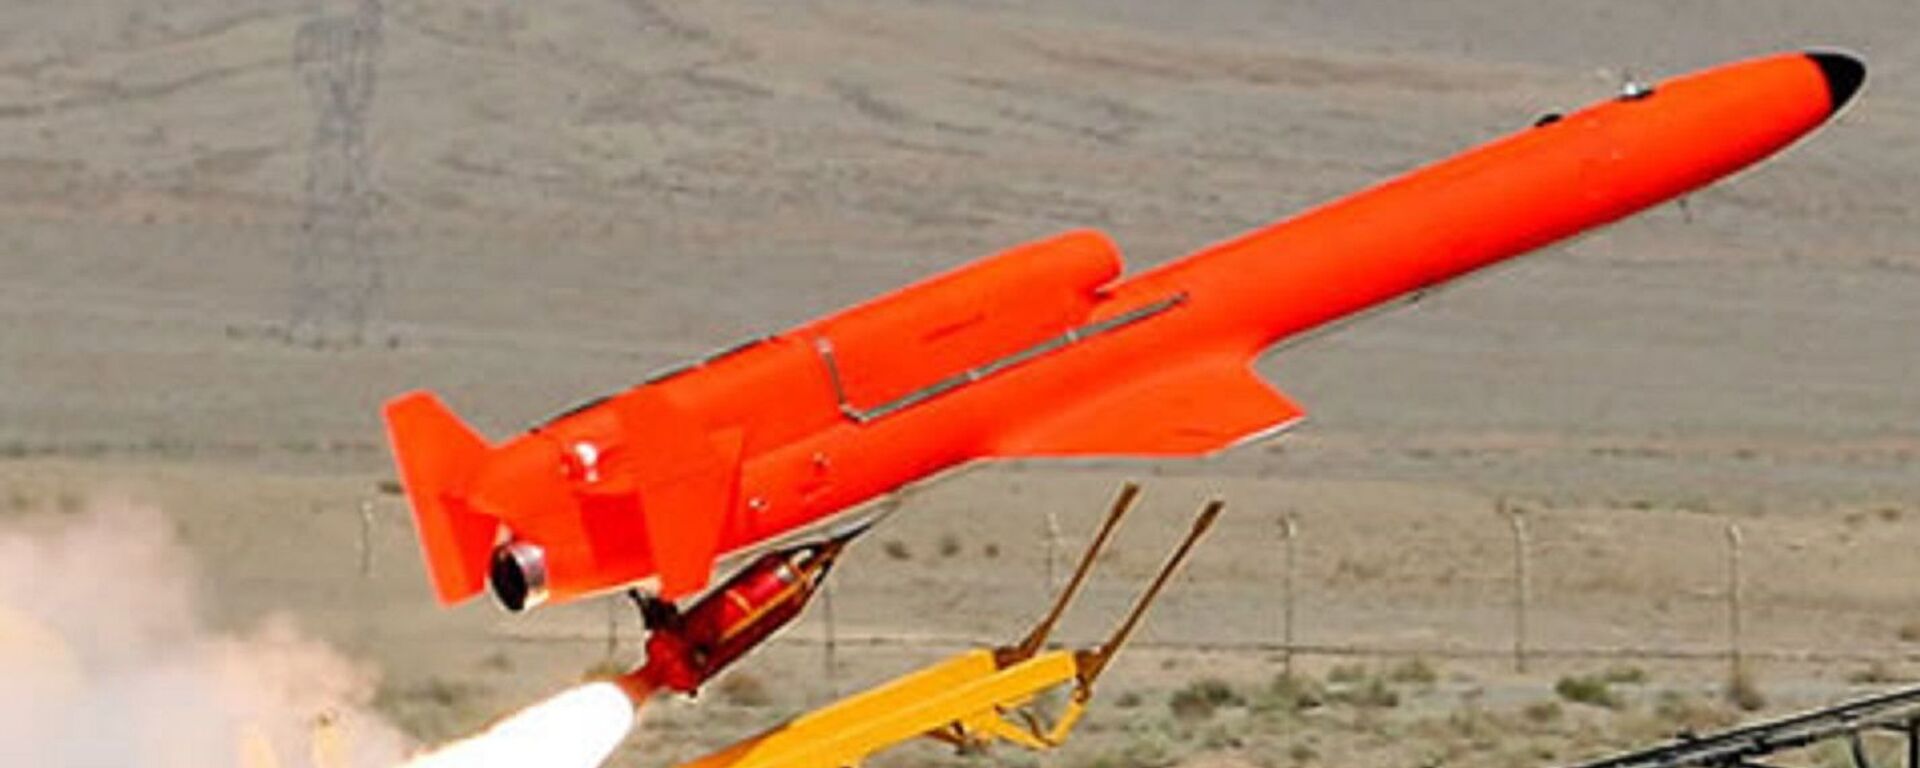 The Iranian jet powered drone Karrar launched by Rocket Assist Take-Off (RATO) booster, acceleratingh the vehicle from a stationary ground launcher. Karrar can also be launched from an aerial platform. - Sputnik International, 1920, 10.09.2021